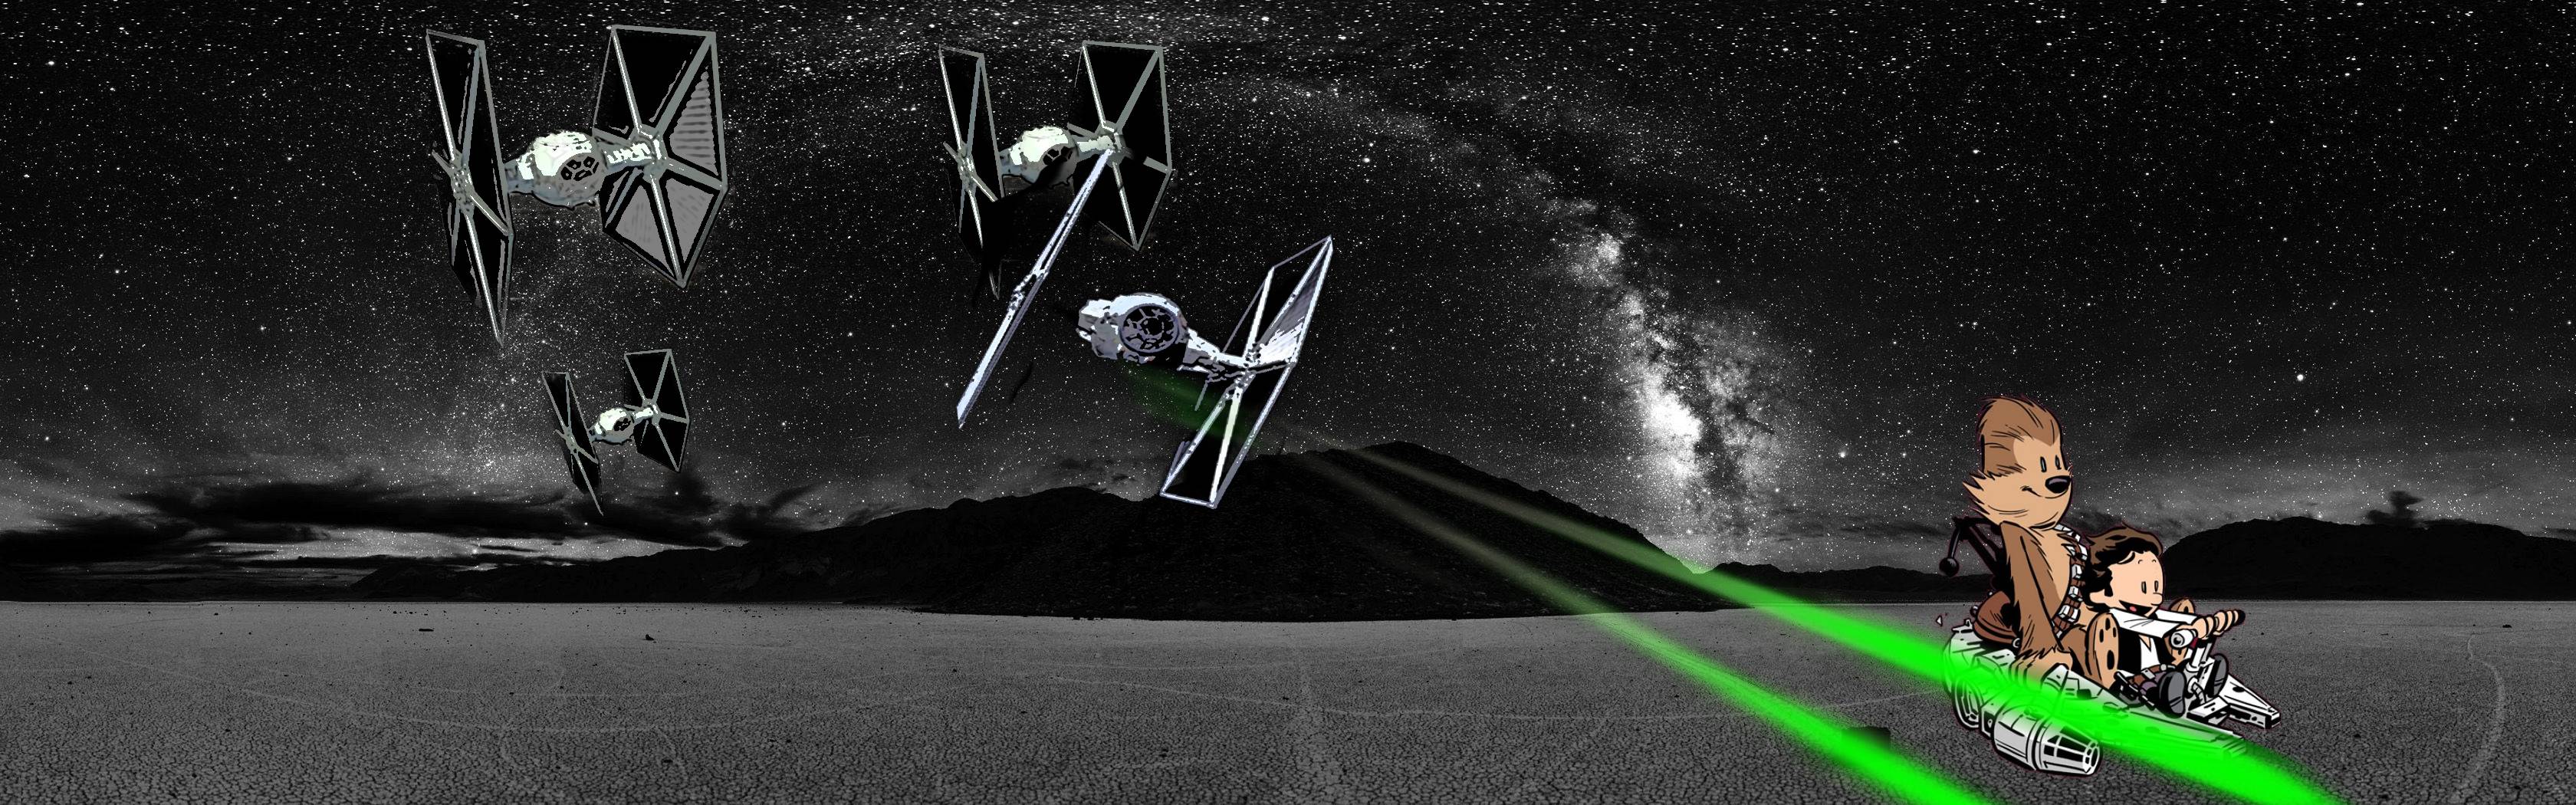 star wars dual screen wallpaper,space,atmosphere,black and white,night,outer space